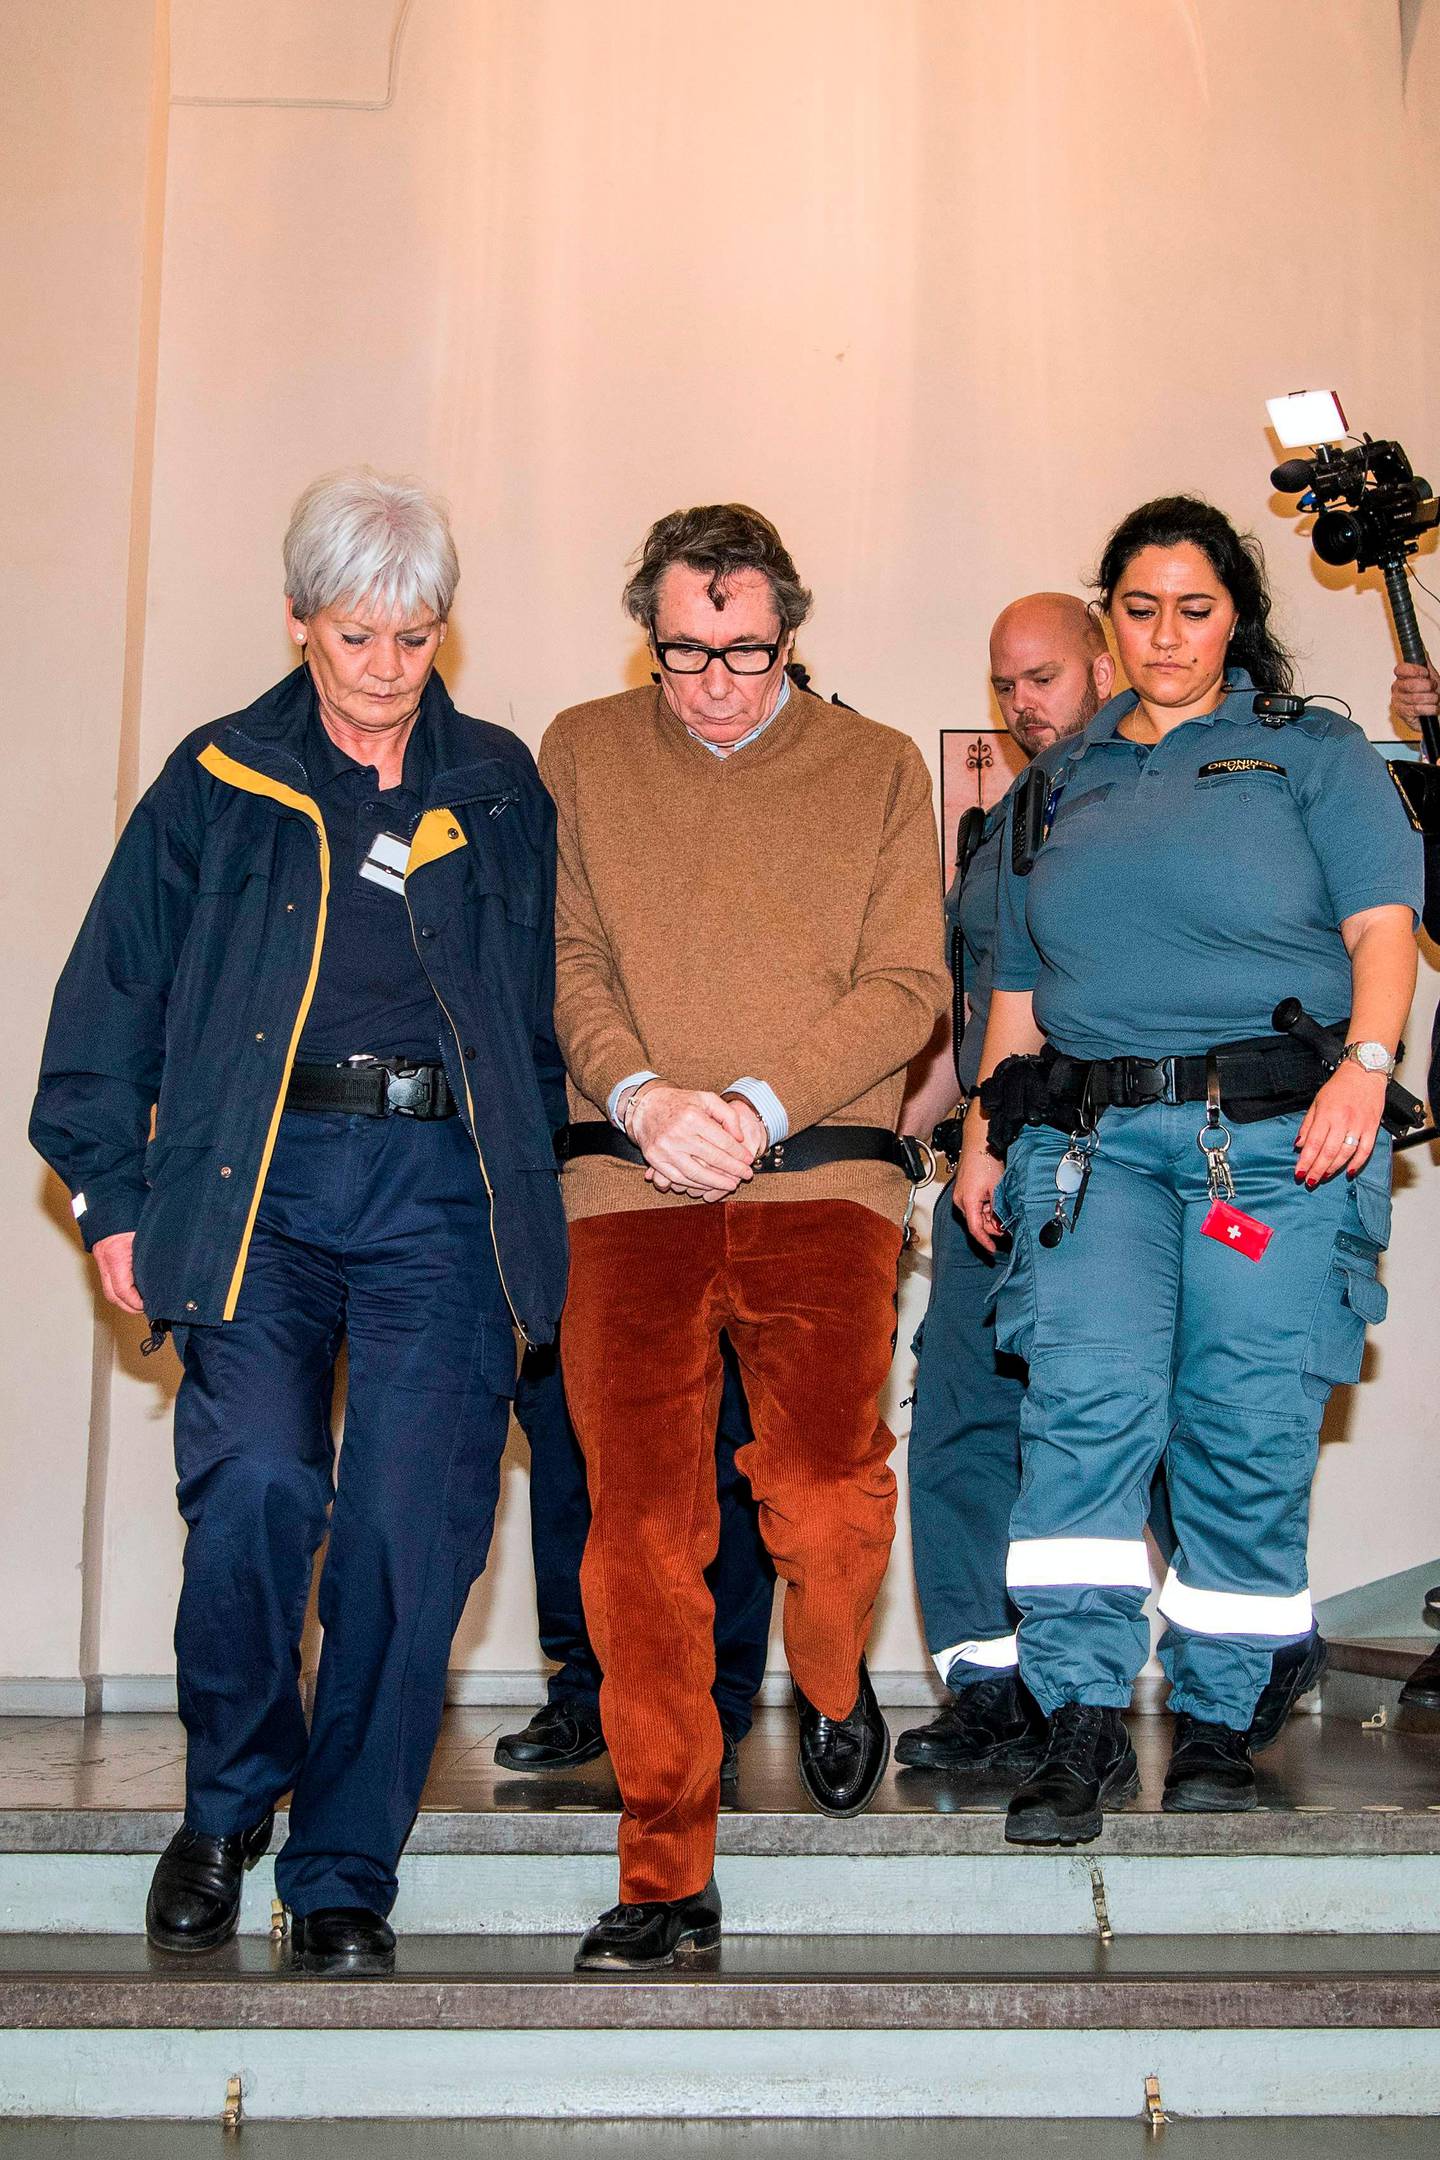 Frenchman Jean-Claude Arnault (C) is escorted out after the first day of his appeal trial on November 12, 2018 in Stockholm. - An appeals trial opens in Stockholm on Monday for a Frenchman jailed two years for rape in a scandal that led to the postponement of this year's Nobel Literature Prize. Once an influential figure in Stockholm's cultural scene, 72-year-old Jean-Claude Arnault was found guilty in October of raping a young woman in 2011 and sentenced to two years in prison. (Photo by Jonathan NACKSTRAND / AFP)